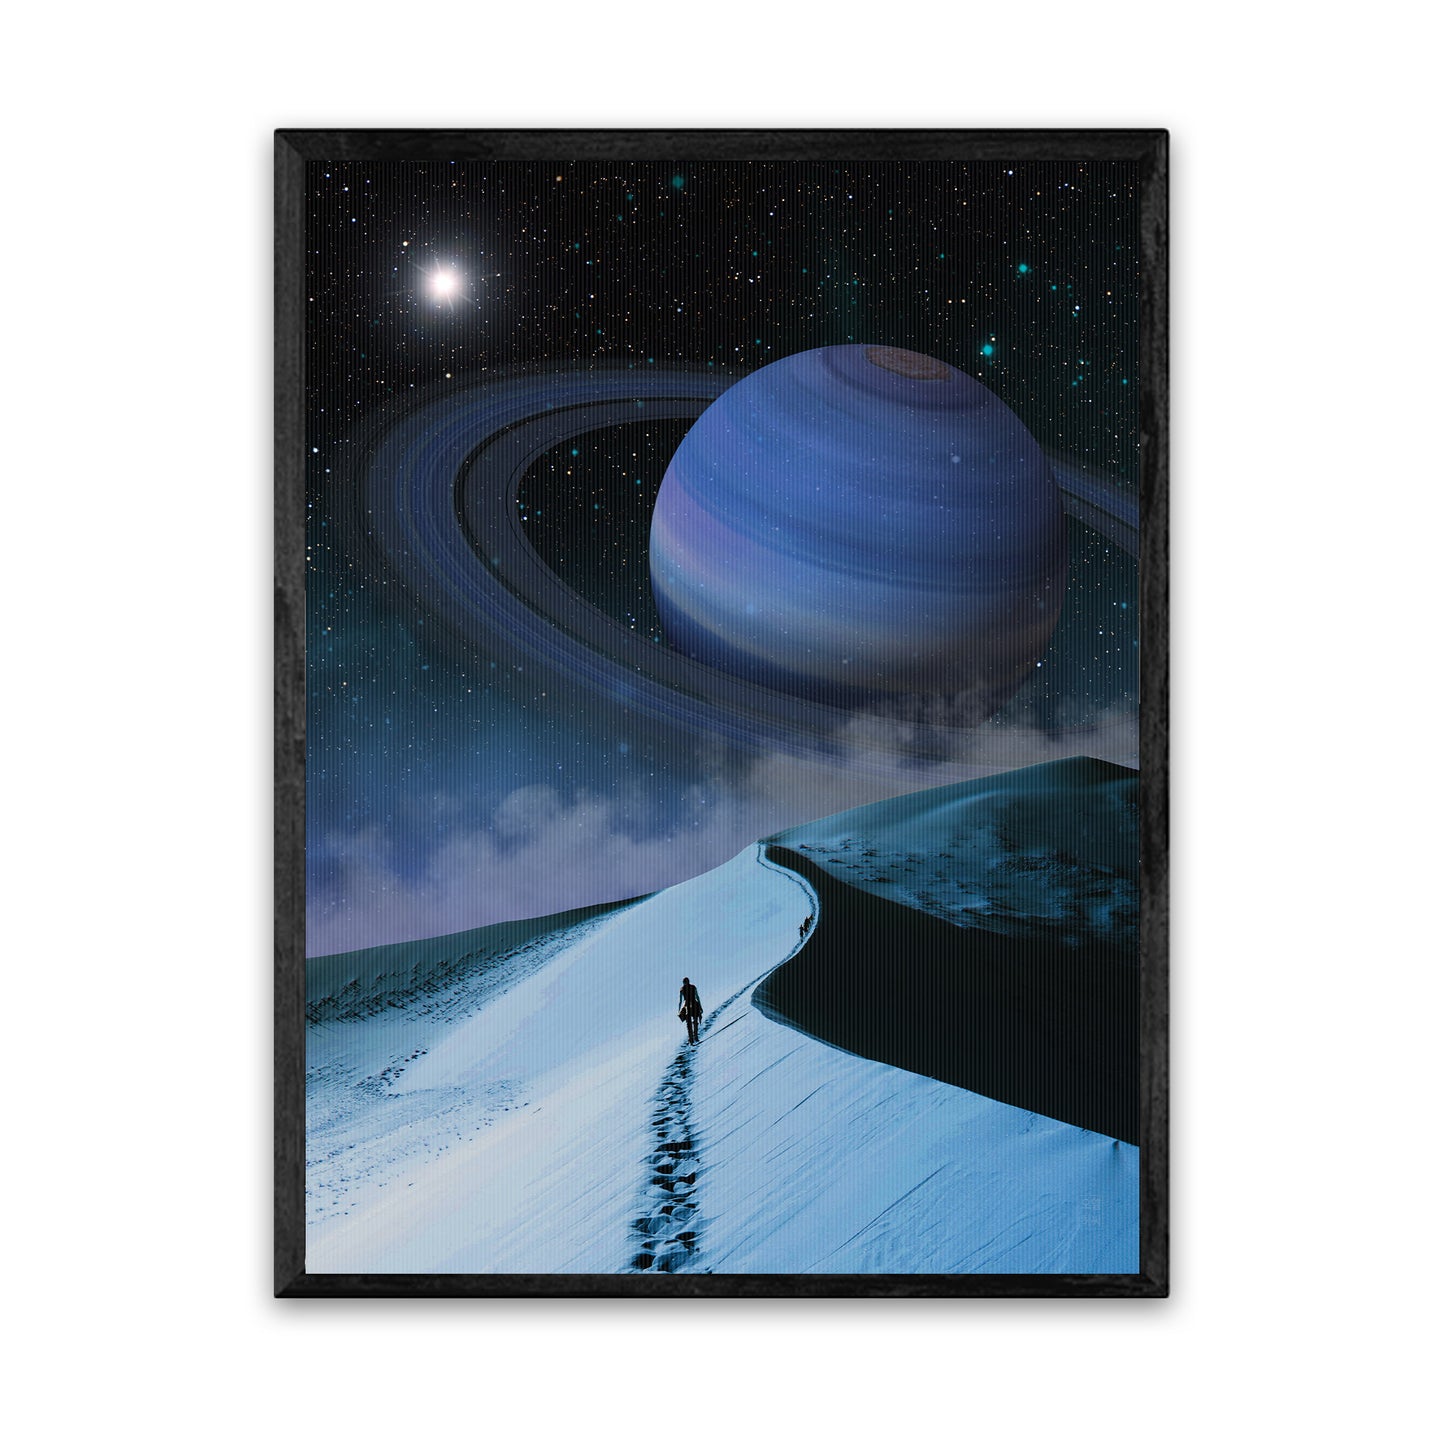 Blue Saturn Hike 18X24 Inch Poster Print for Space Art & Saturn fans, great gift for home decor and room design.